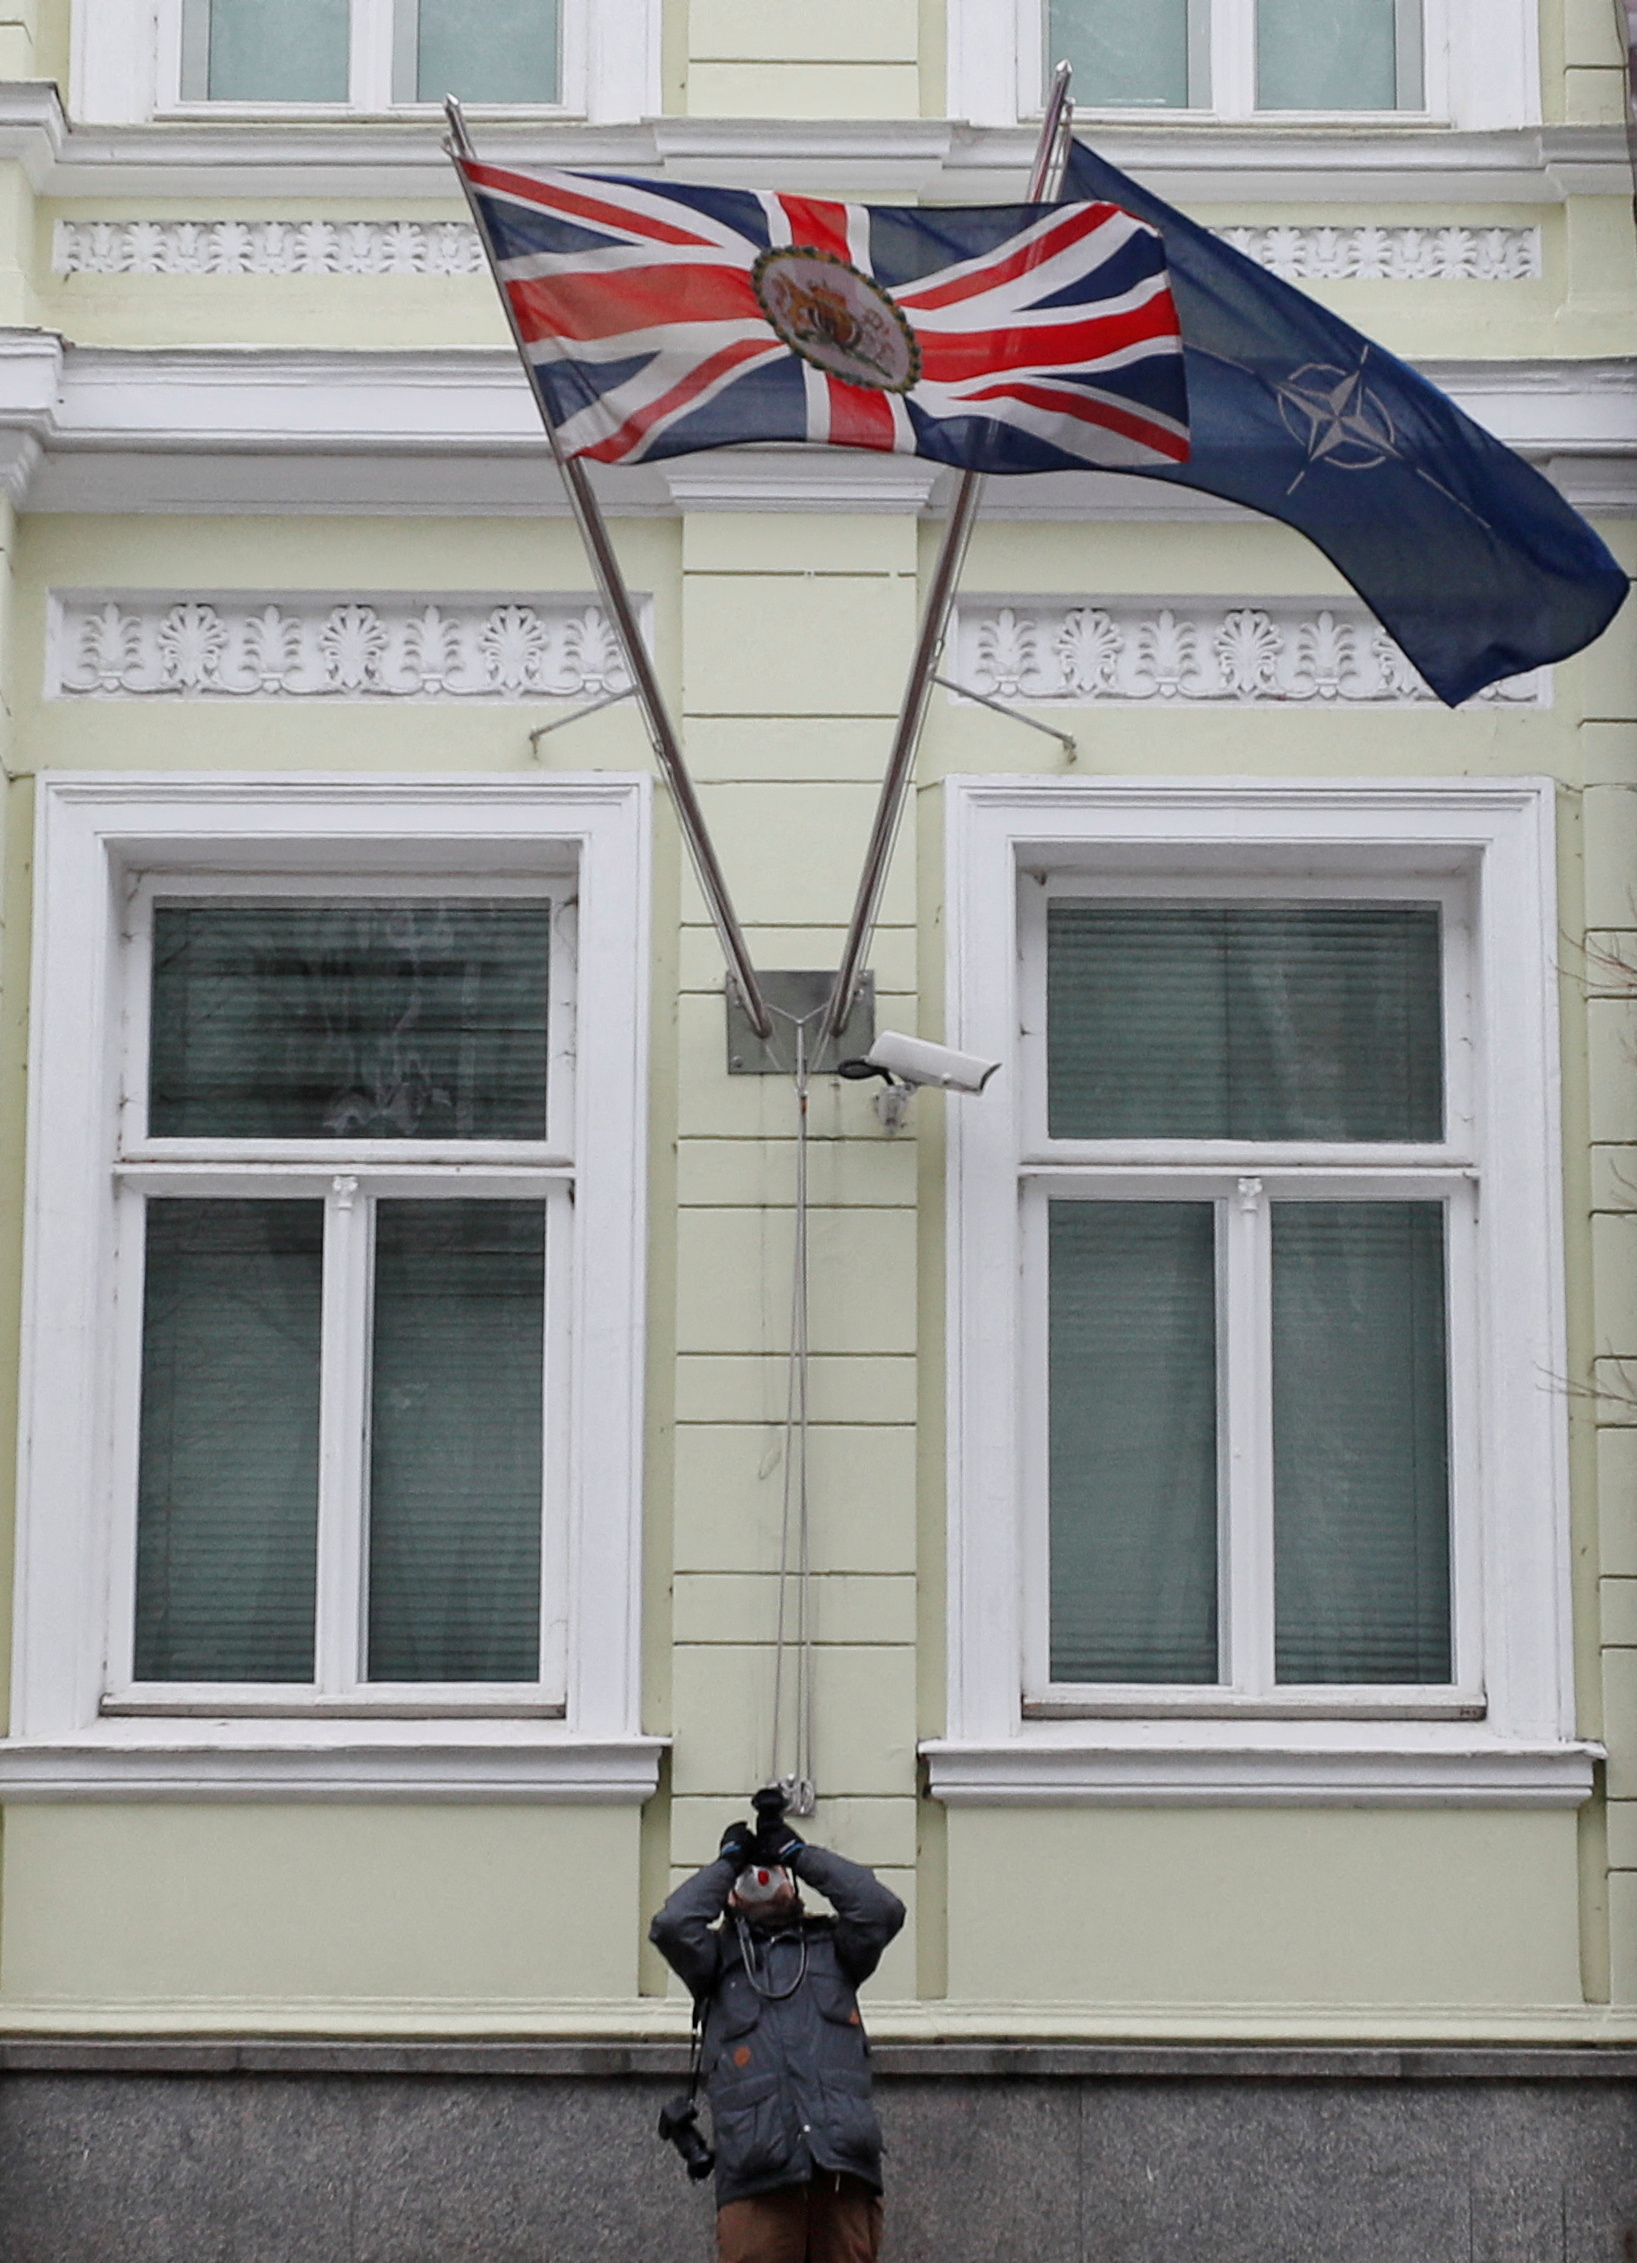 A view shows the British Embassy in Kyiv